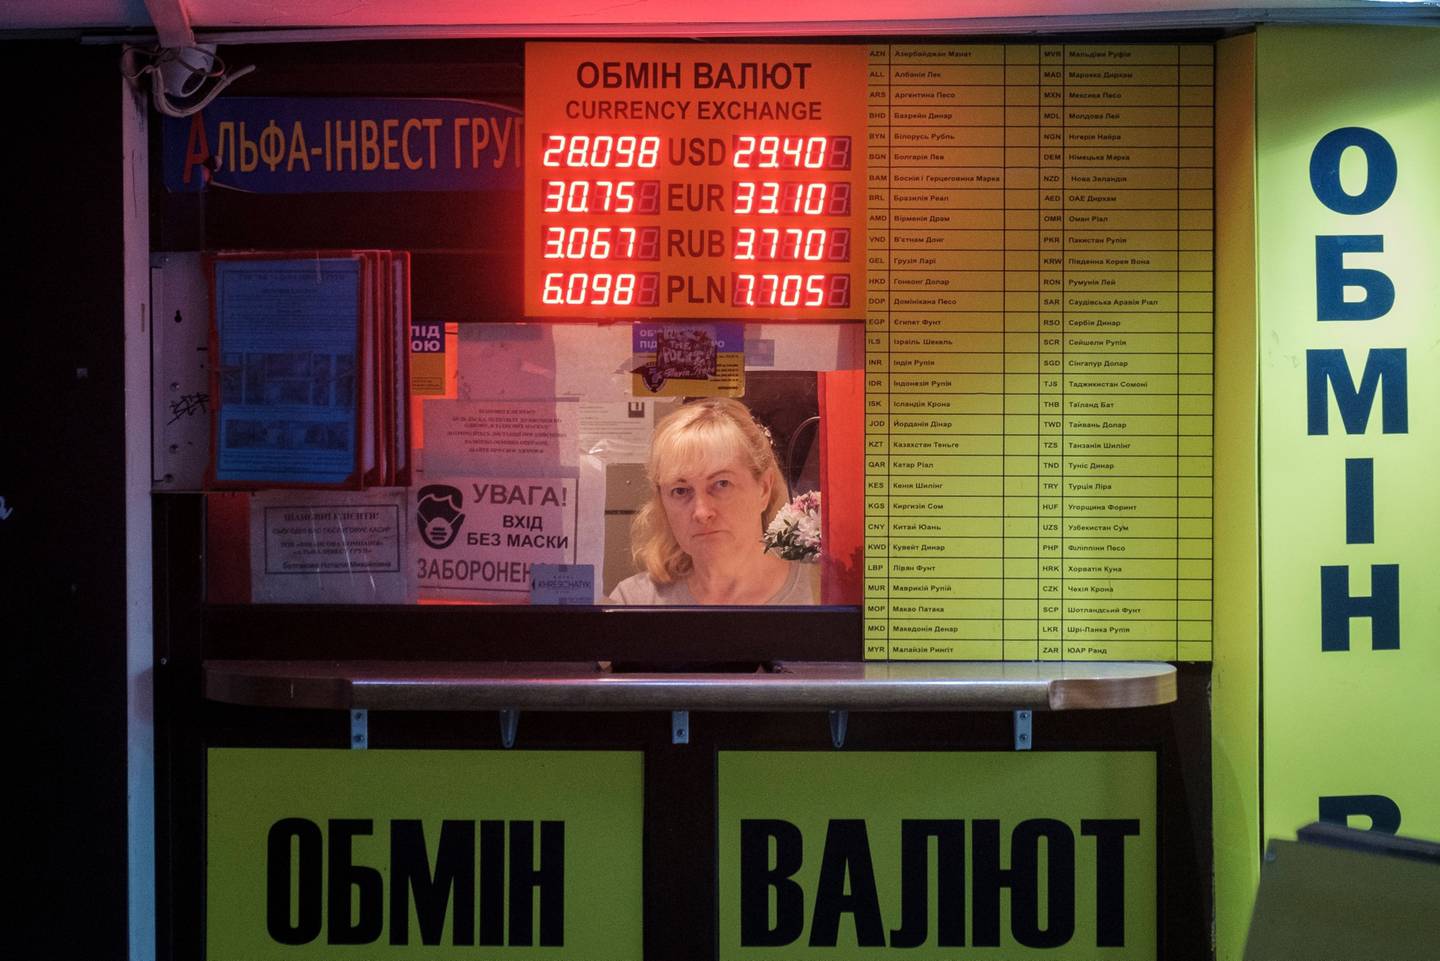 A sign shows exchange rates at a bureau de change in the Maidan subway station in Kyiv, Ukraine, on Tuesday, February 22 2022. dfd